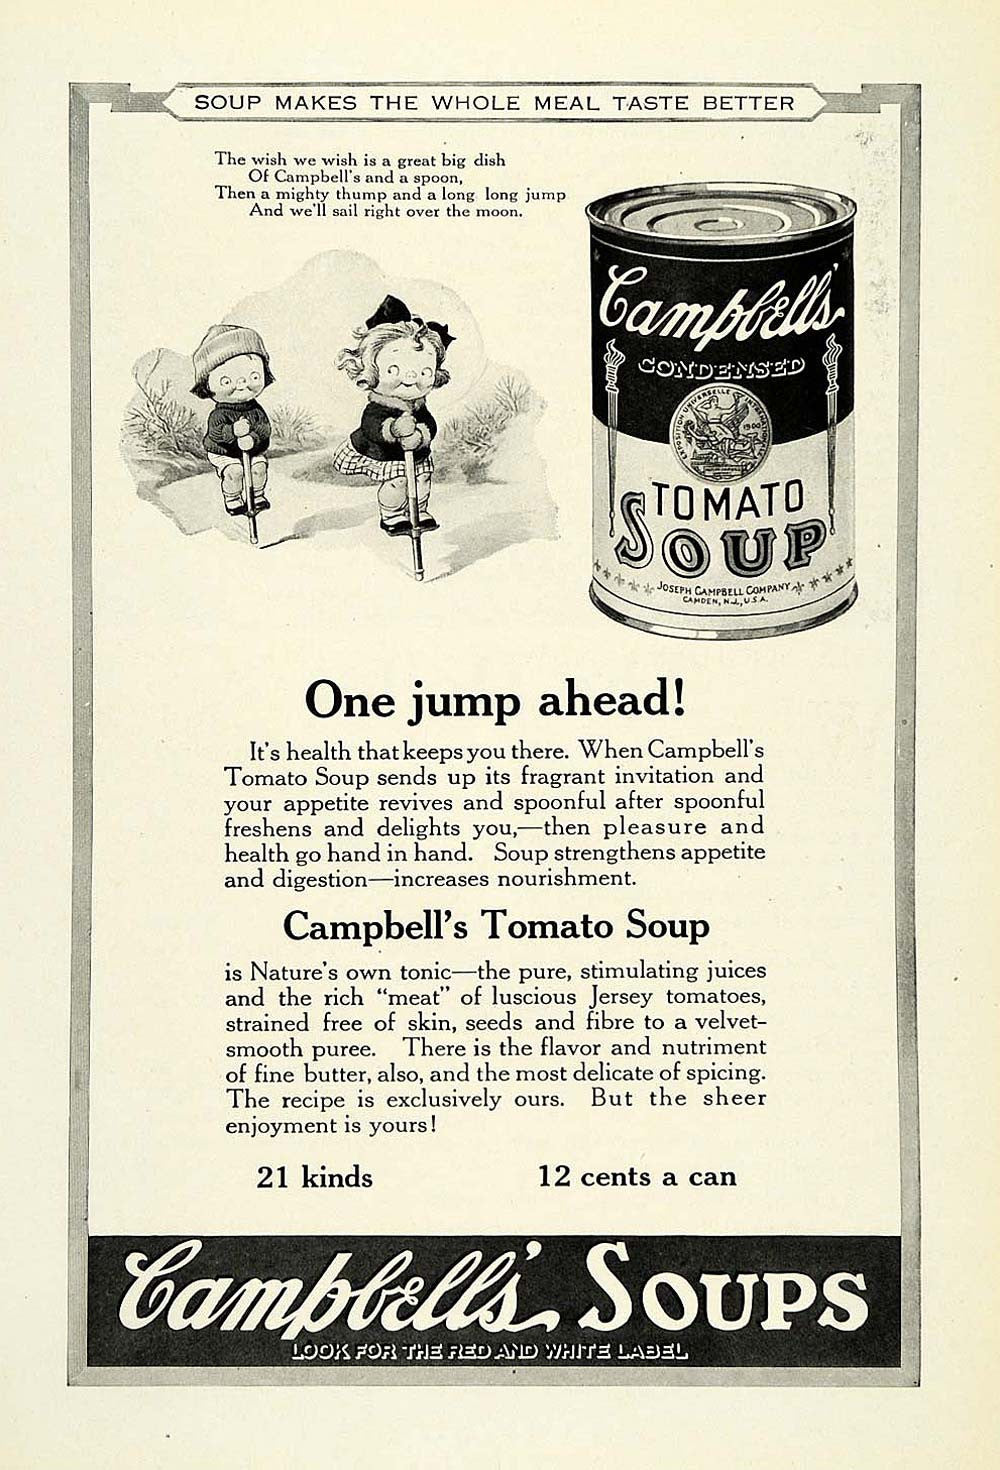 1922 Ad Campbell's Soups Condensed Tomato Soup Canned Food Pogo Stick Can NGM1 - Period Paper
